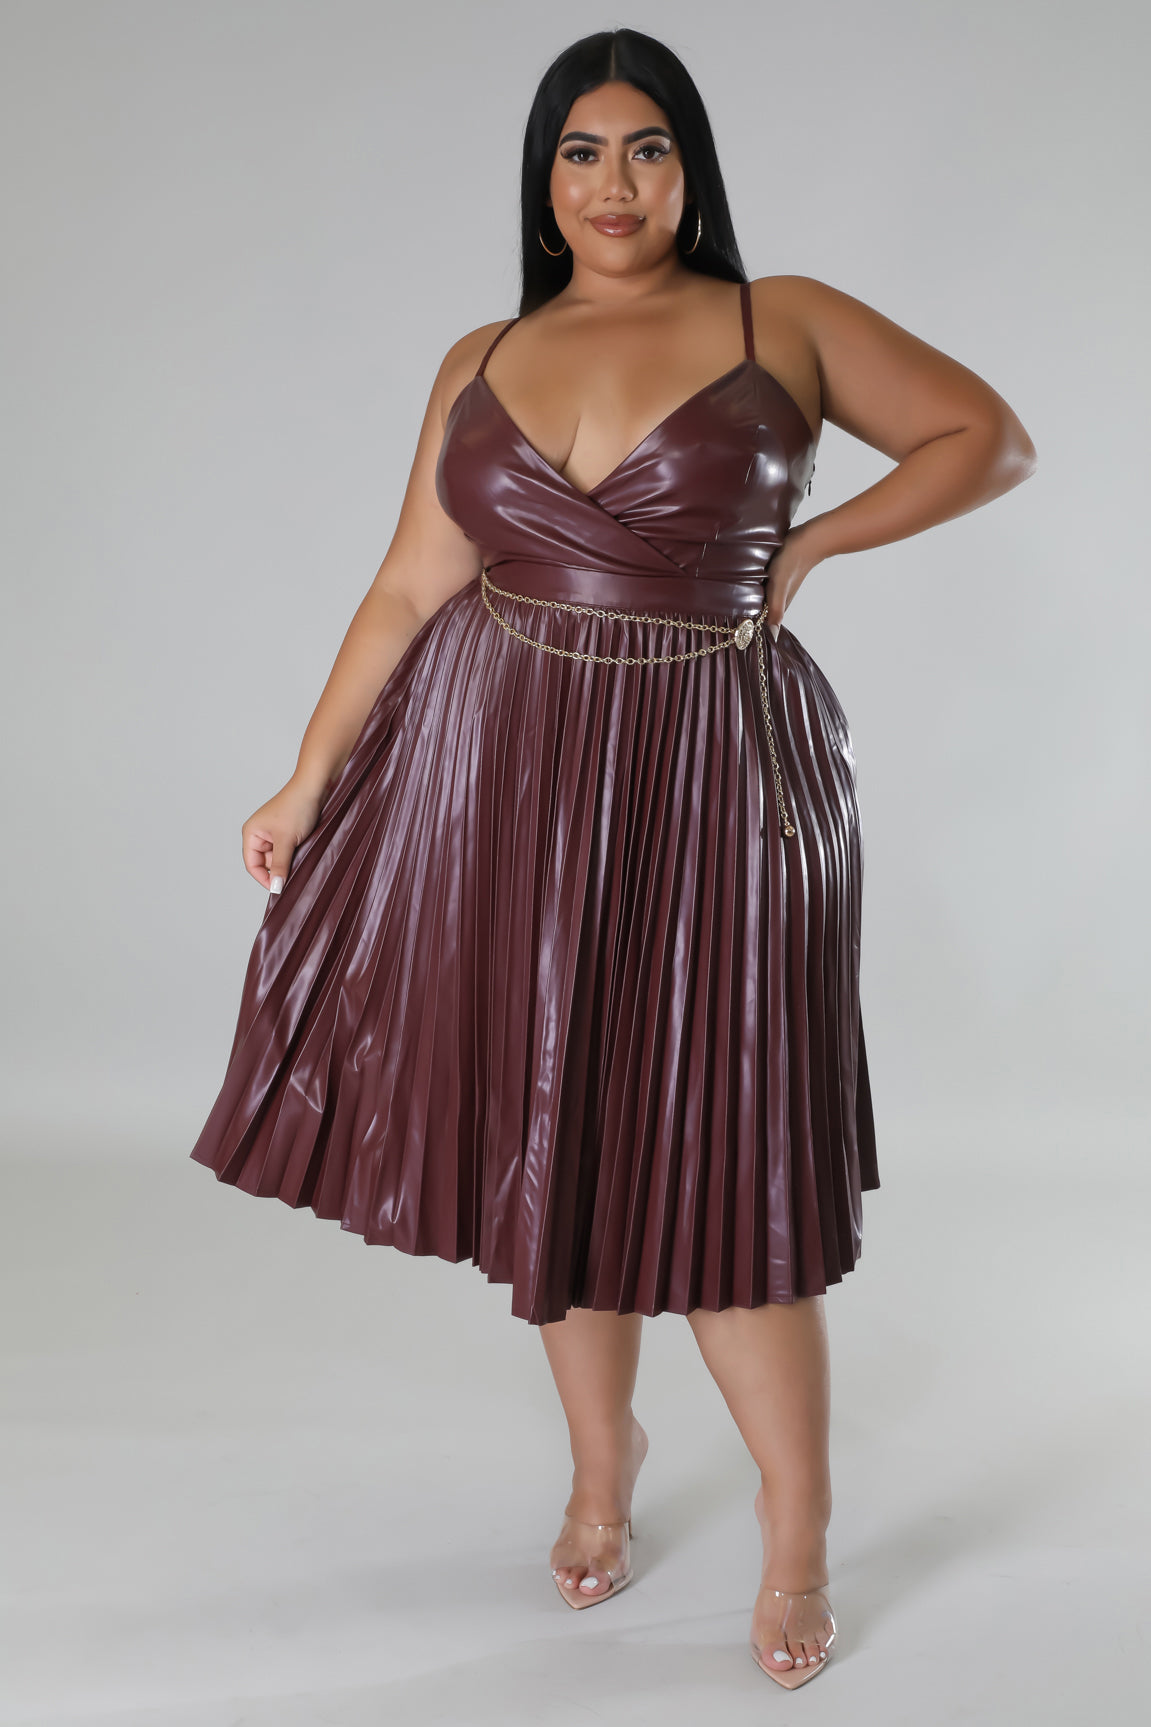 yoyo-reign-plus-size-clothing-Burgundy-Pleated-Belted-Skater-Dress